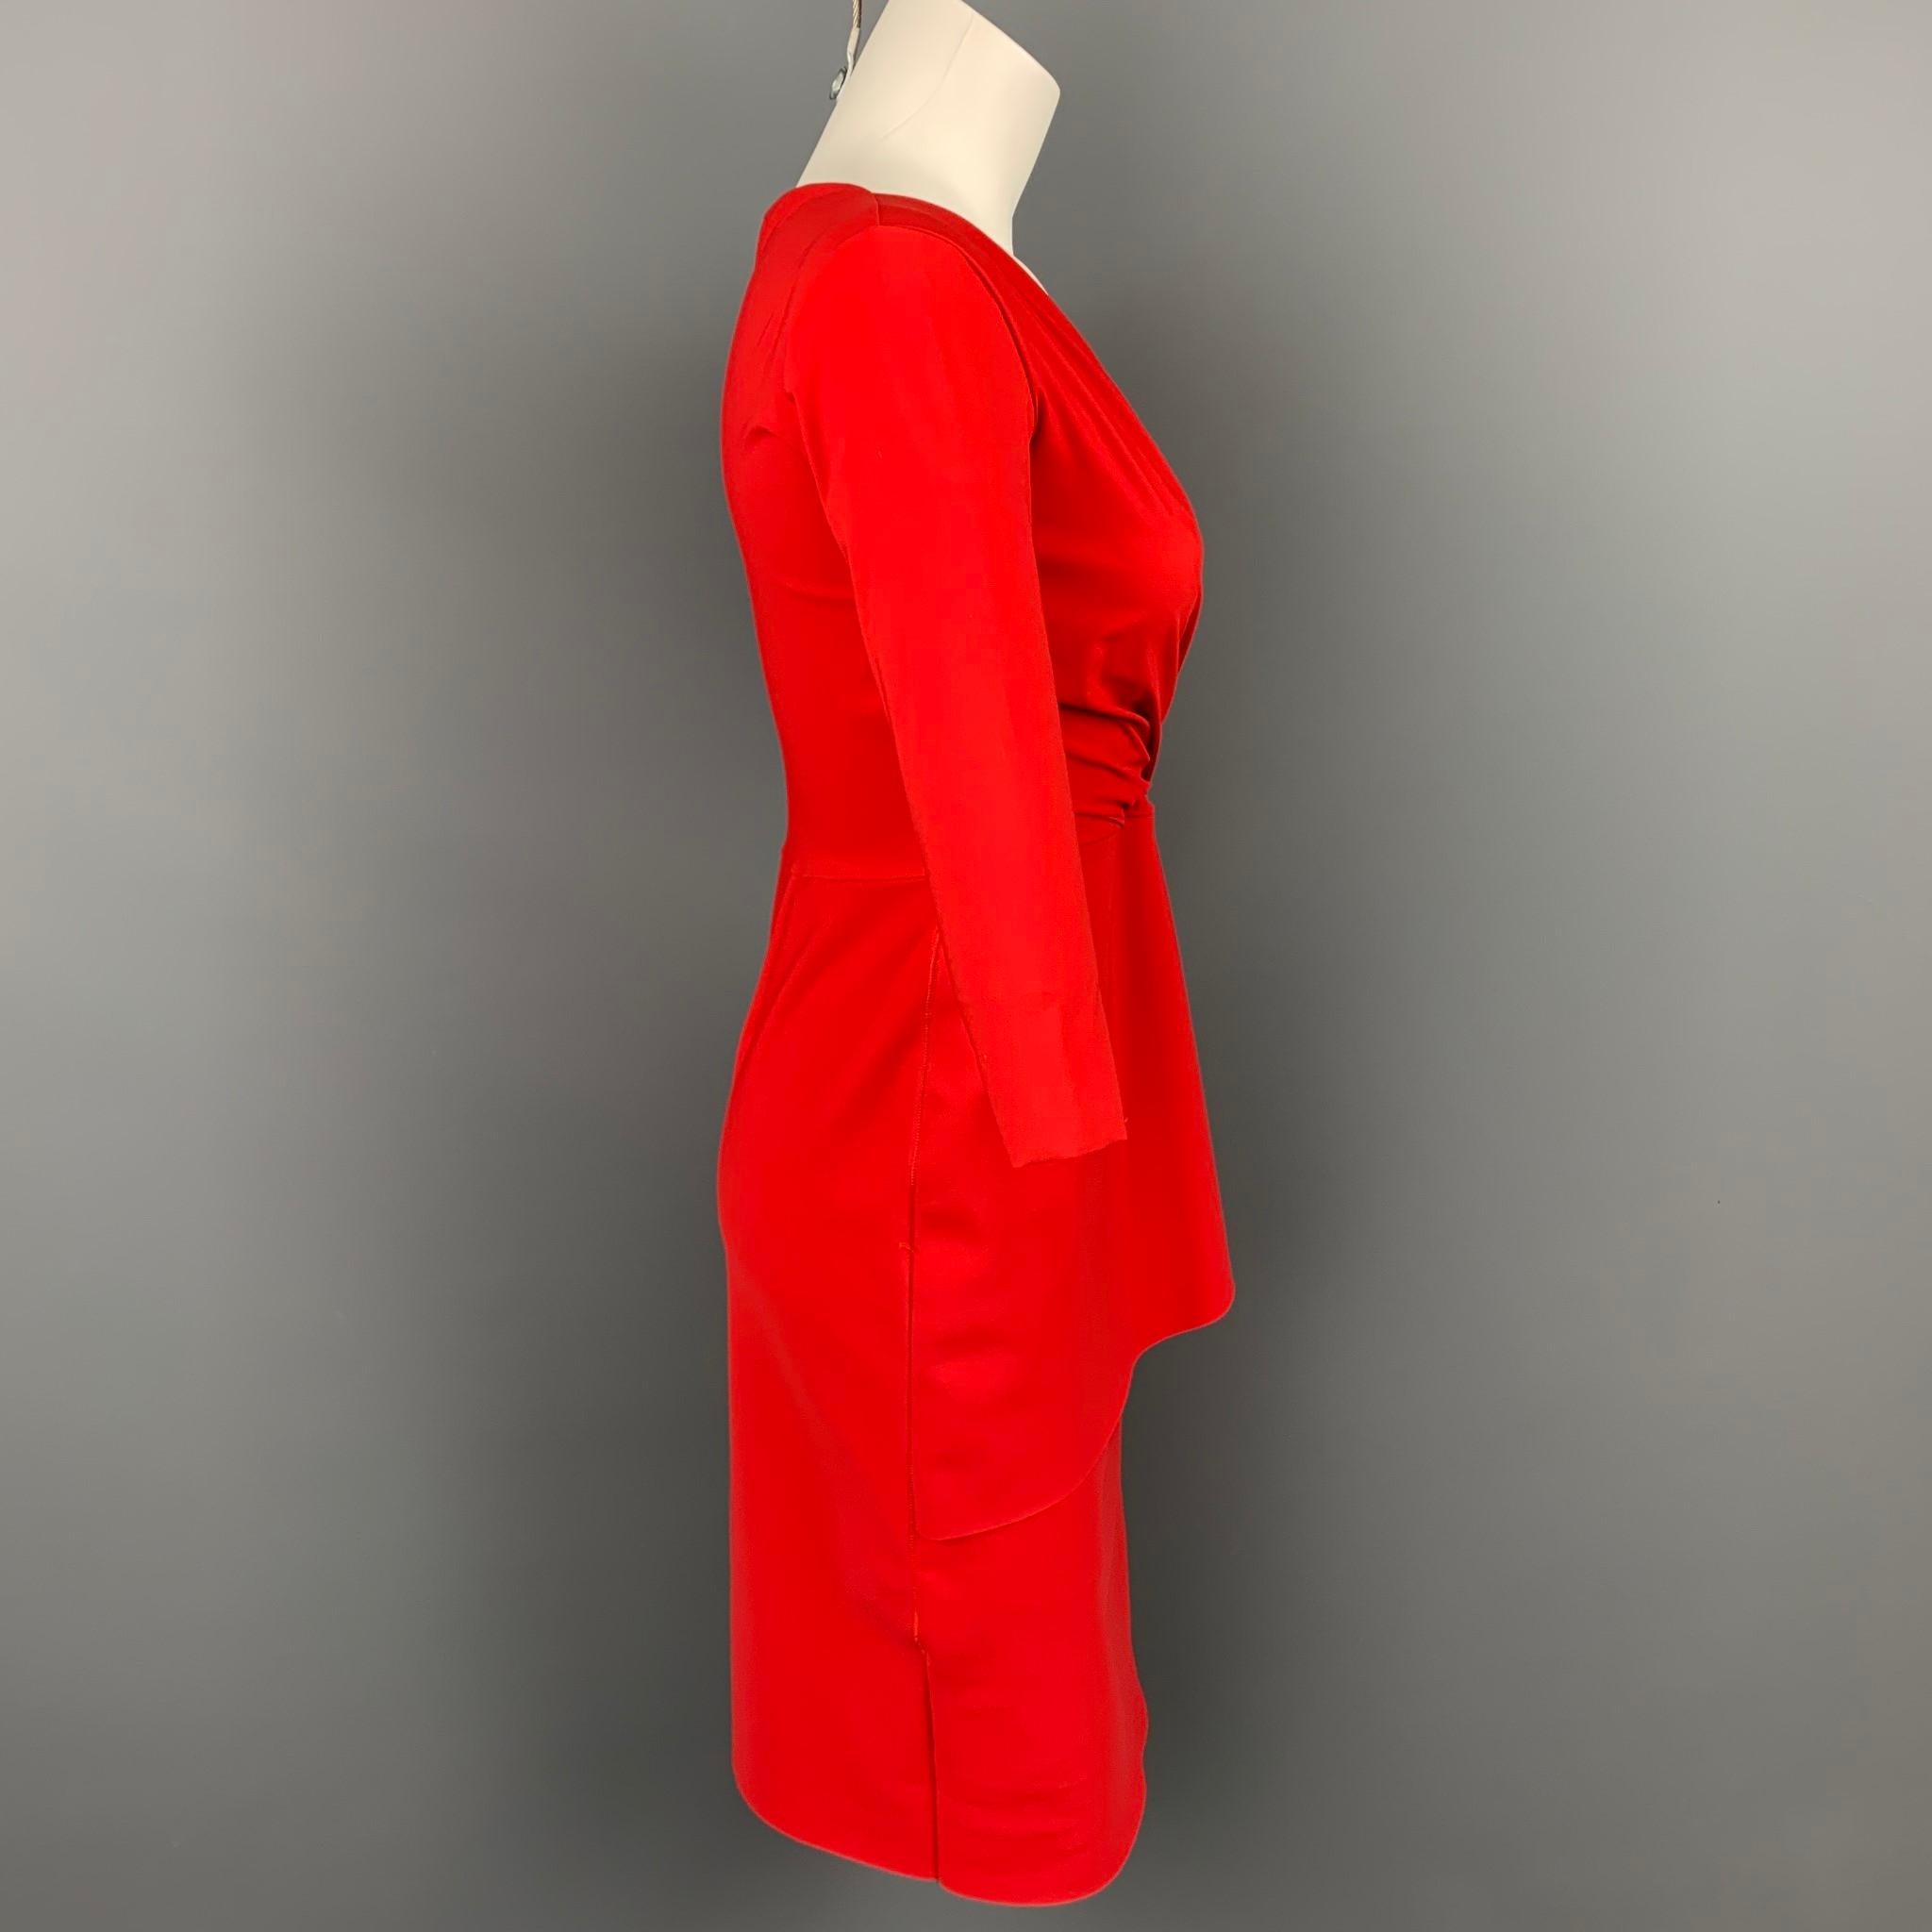 CHIARA BONI dress comes in a red polyamide featuring a peplum style and a v-neck. Made in Italy.

Very Good Pre-Owned Condition.
Marked: IT 40
Original Retail Price: $695.00

Measurements:

Shoulder: 15 in.
Bust: 30 in.
Waist: 24 in.
Hip: 31